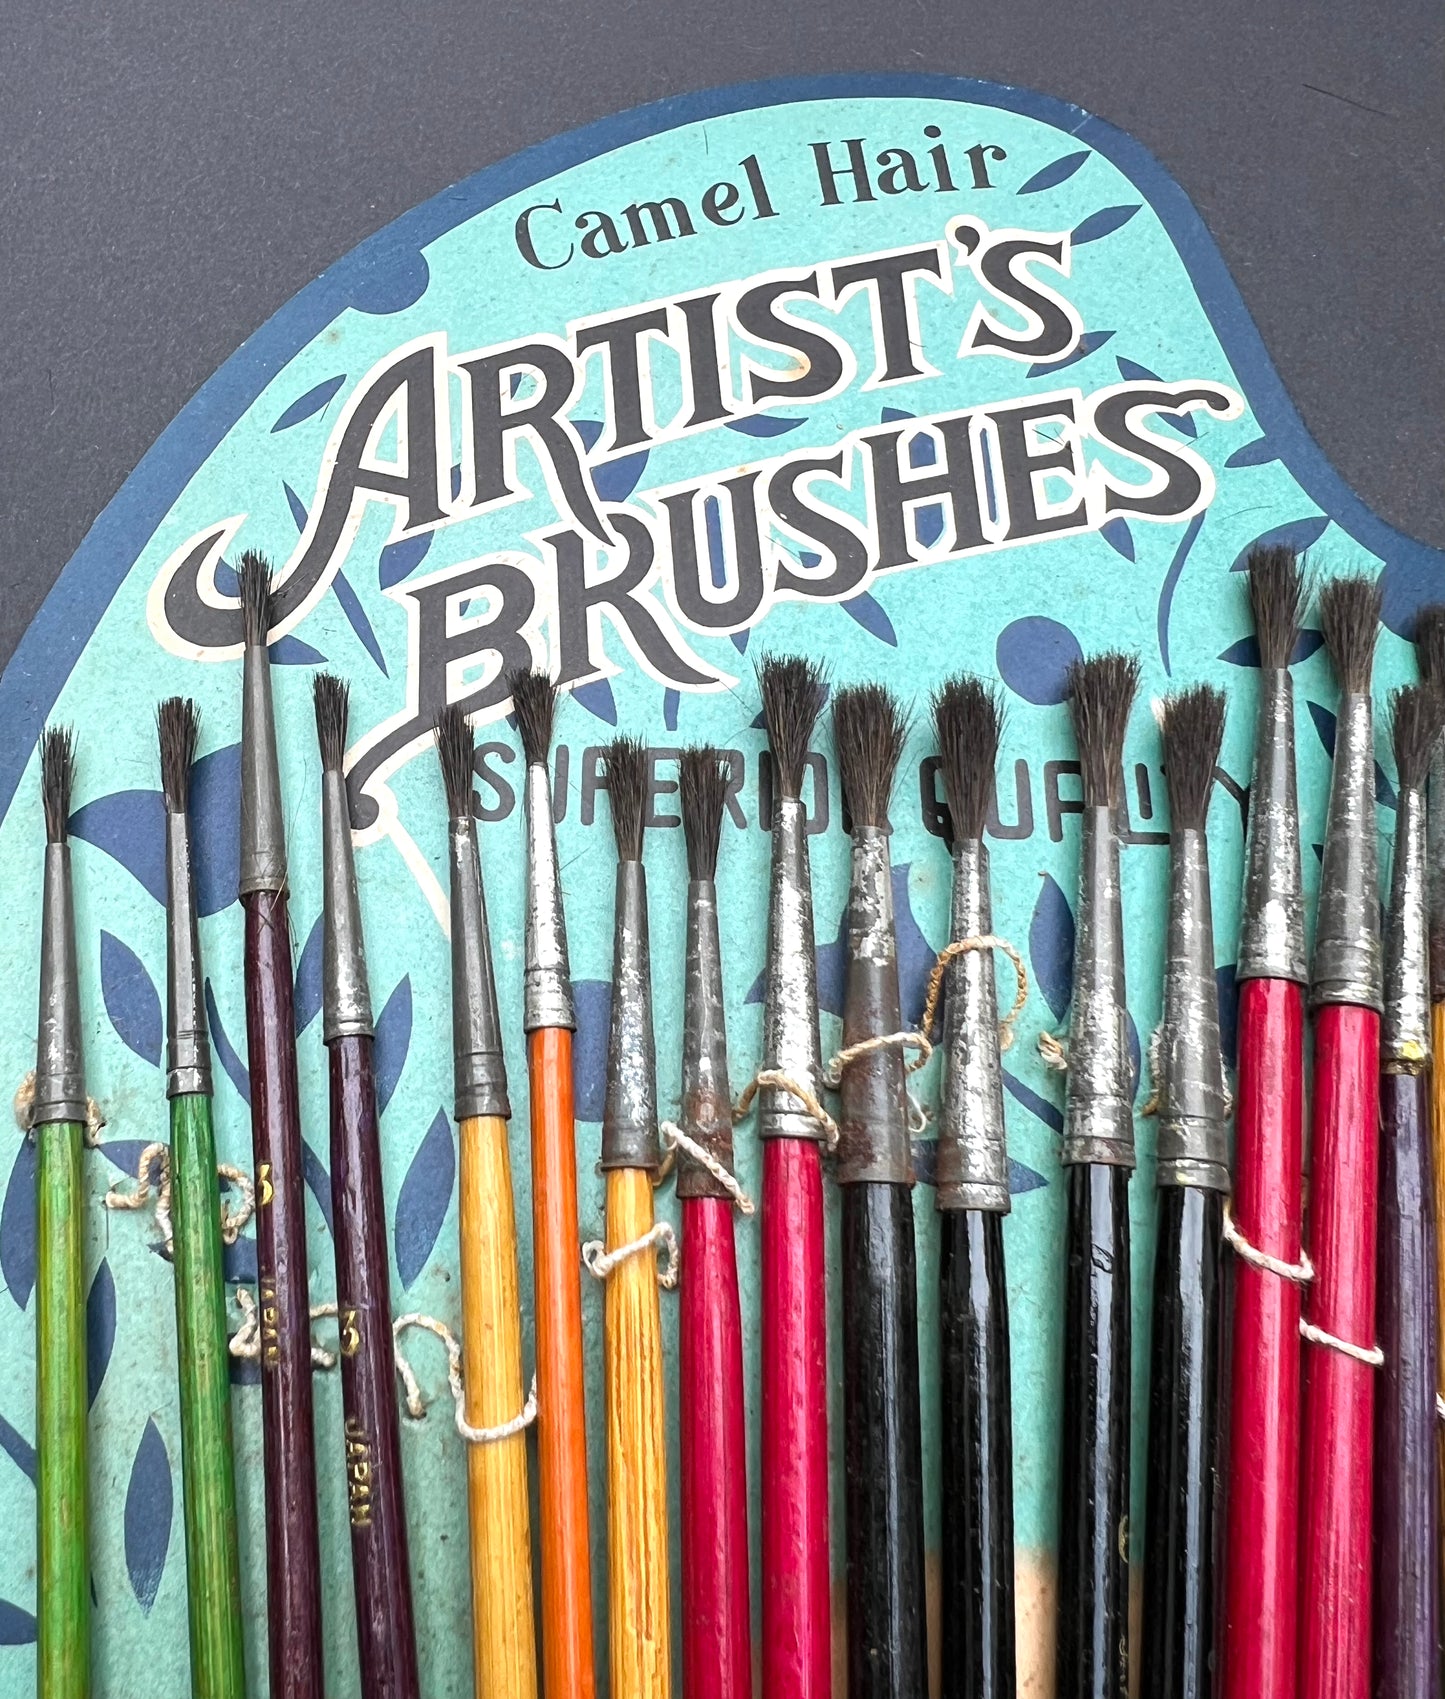 1940S ARTIST'S BRUSHES Shop Display Card Made in Japan